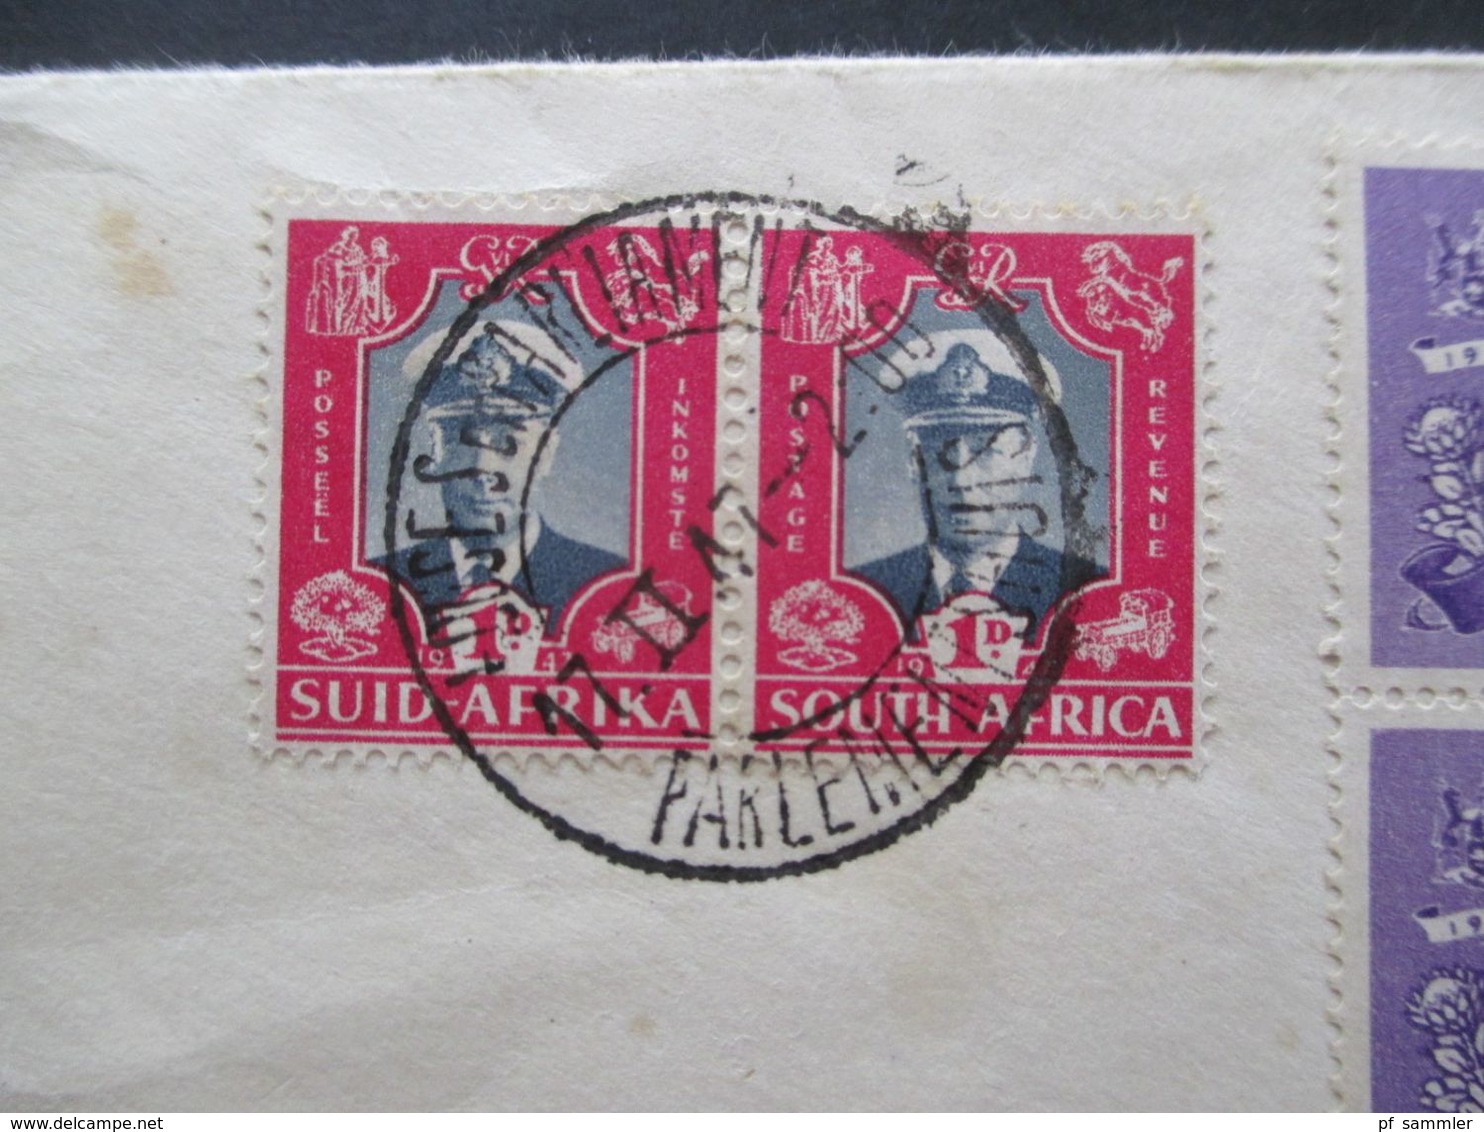 Südafrika 1947 Beleg Mit Wappen House Of Assembly Cape Town 3 Paare South Africa / Suid Africa Stempel Parliament - Briefe U. Dokumente